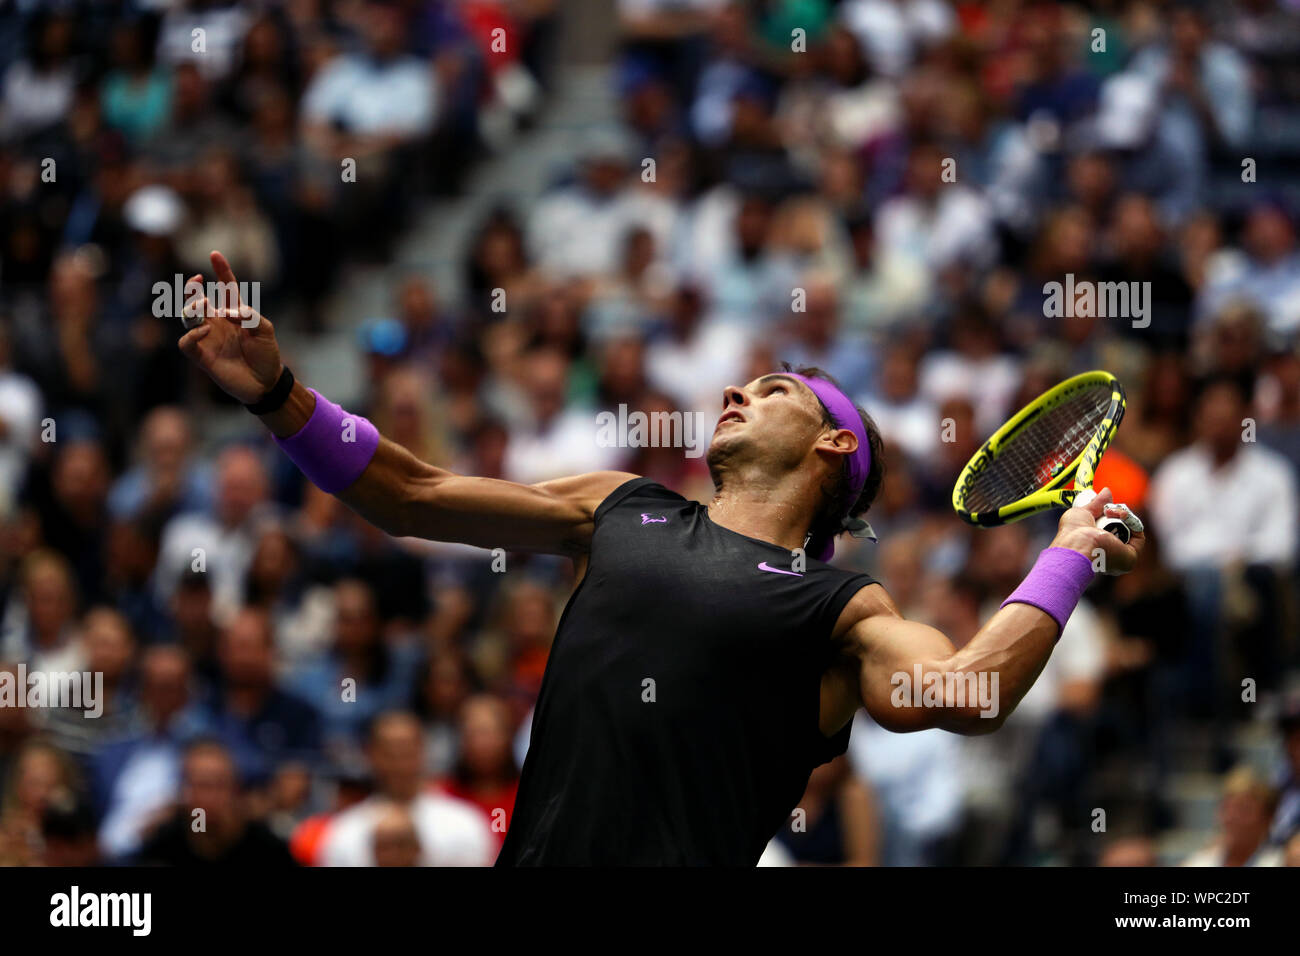 Flushing Meadows, New York, United States - September 8, 2019. Rafael Nadal of Spain serving against Daniil Medvedev in the men's final at the US Open today. Credit: Adam Stoltman/Alamy Live News Stock Photo